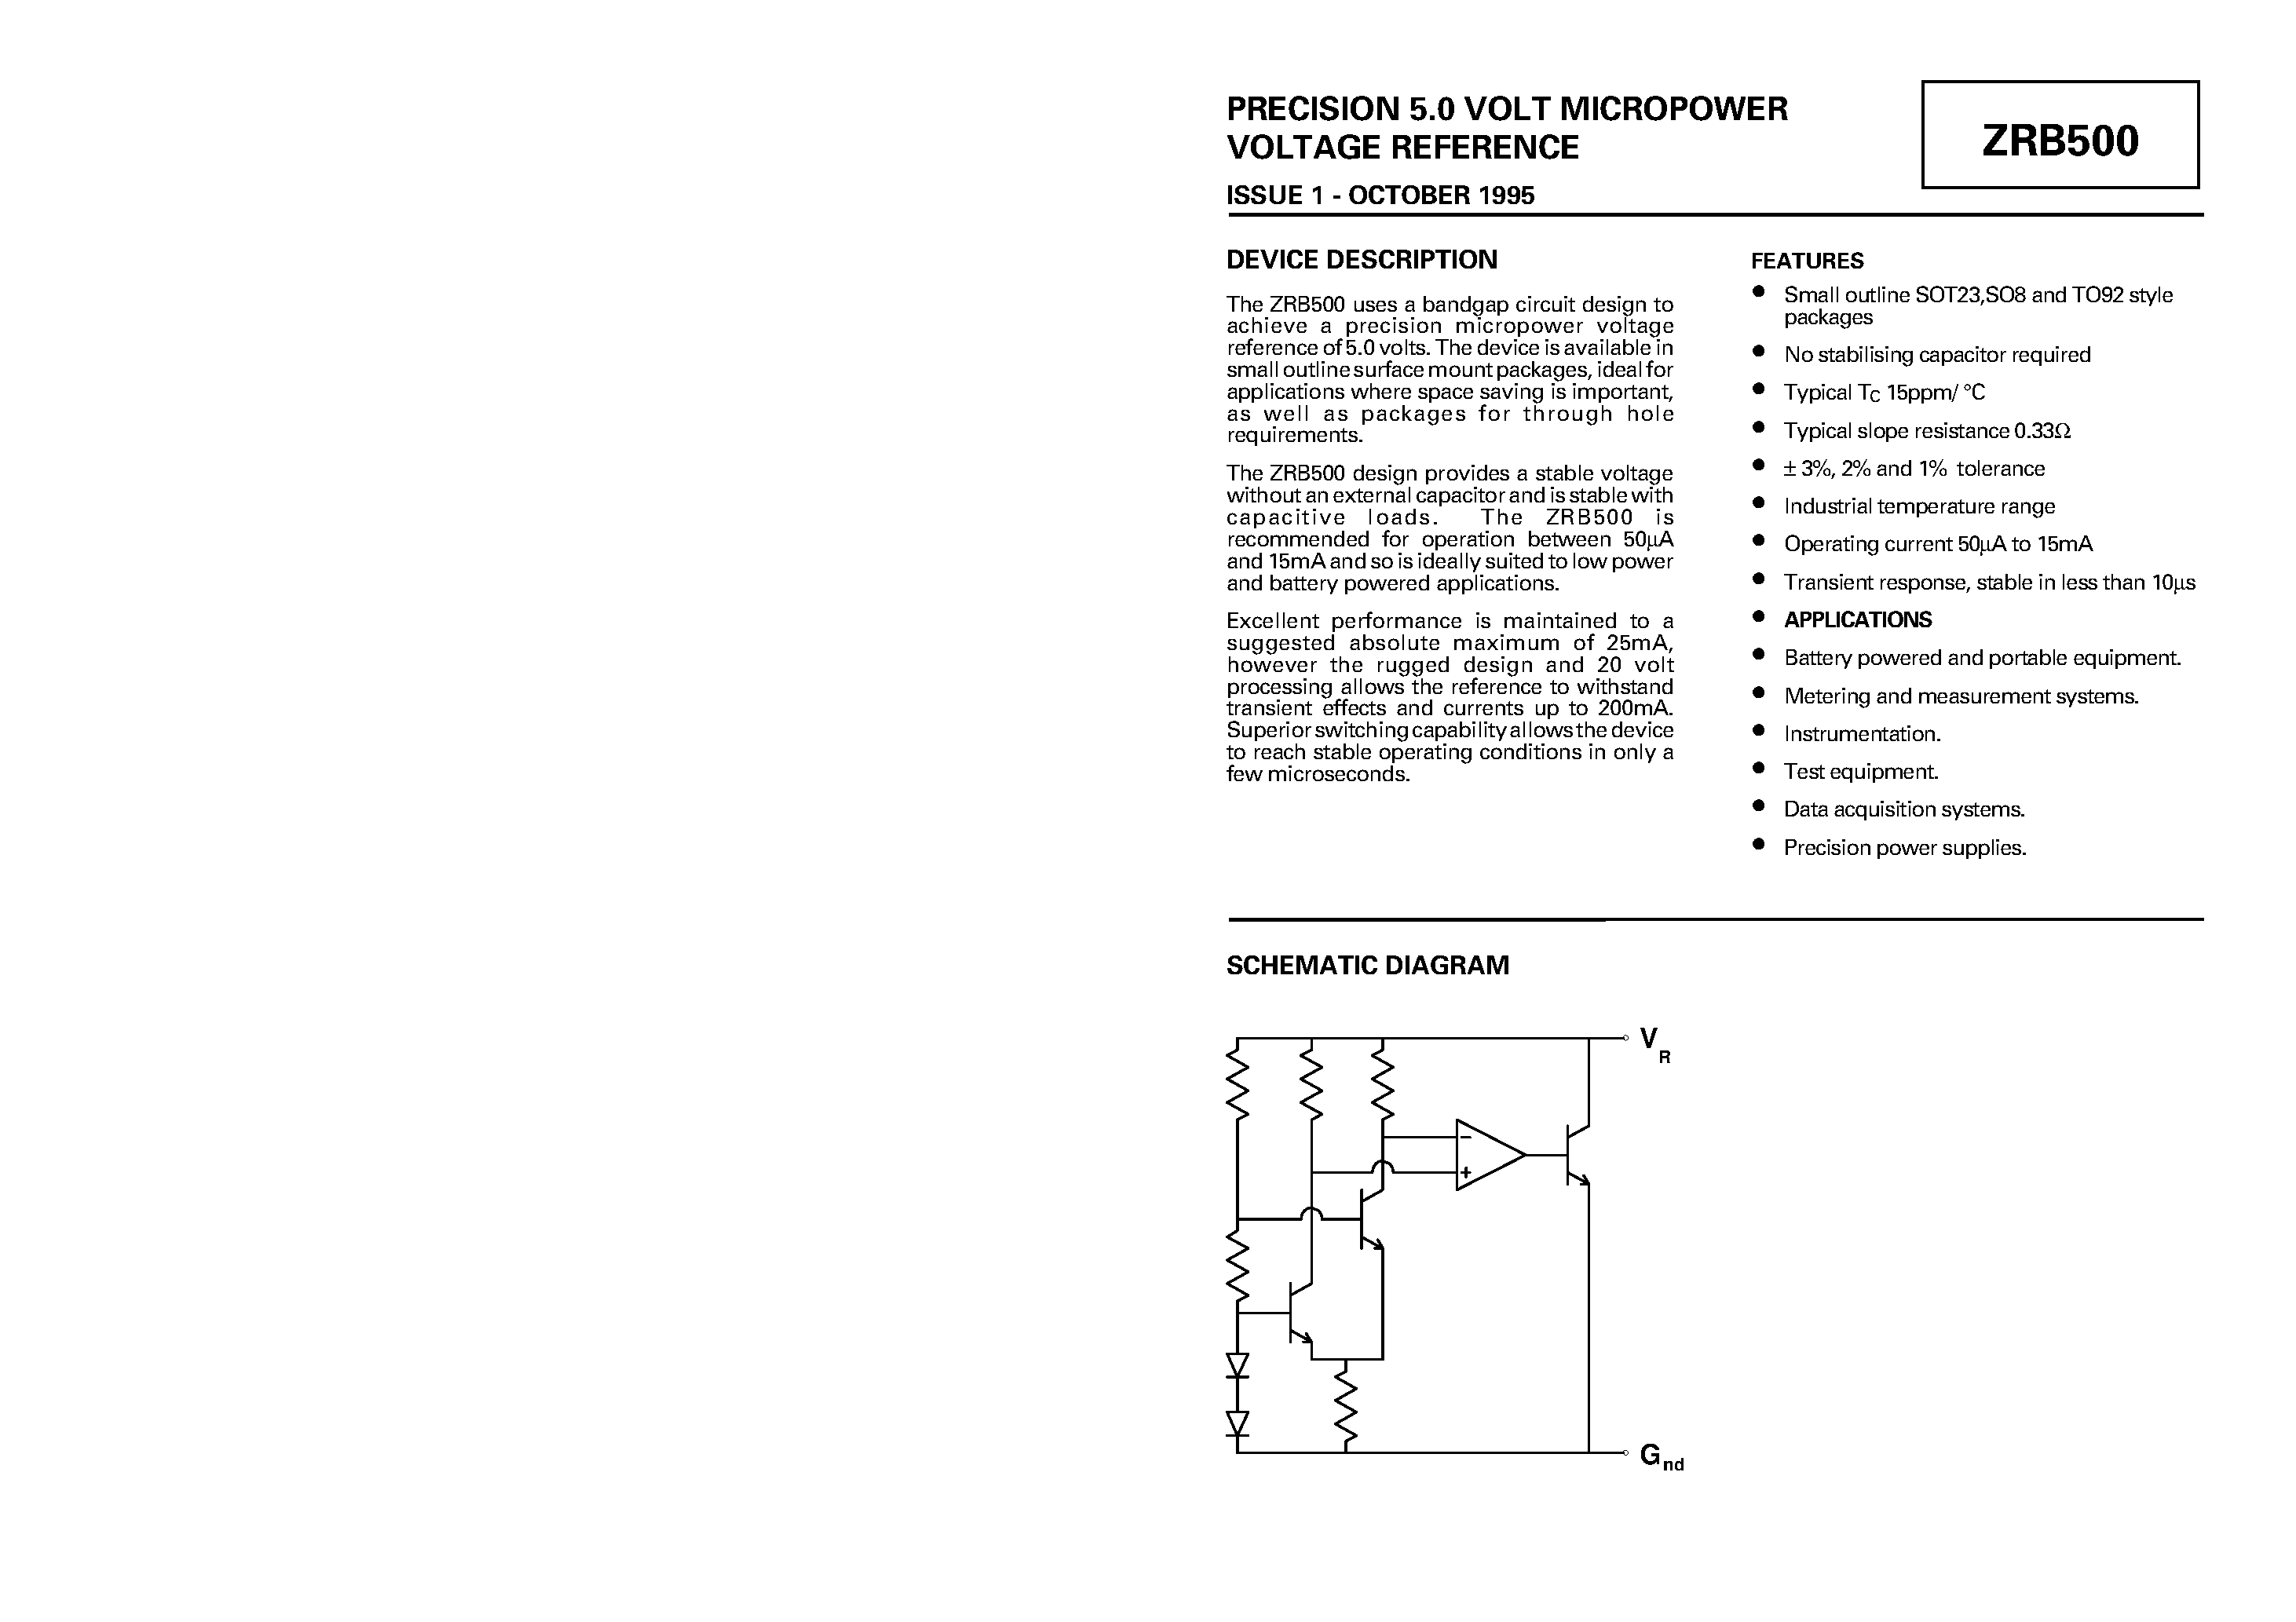 Datasheet ZRB500A03 - PRECISION 5.0 VOLT MICROPOWER VOLTAGE REFERENCE page 1